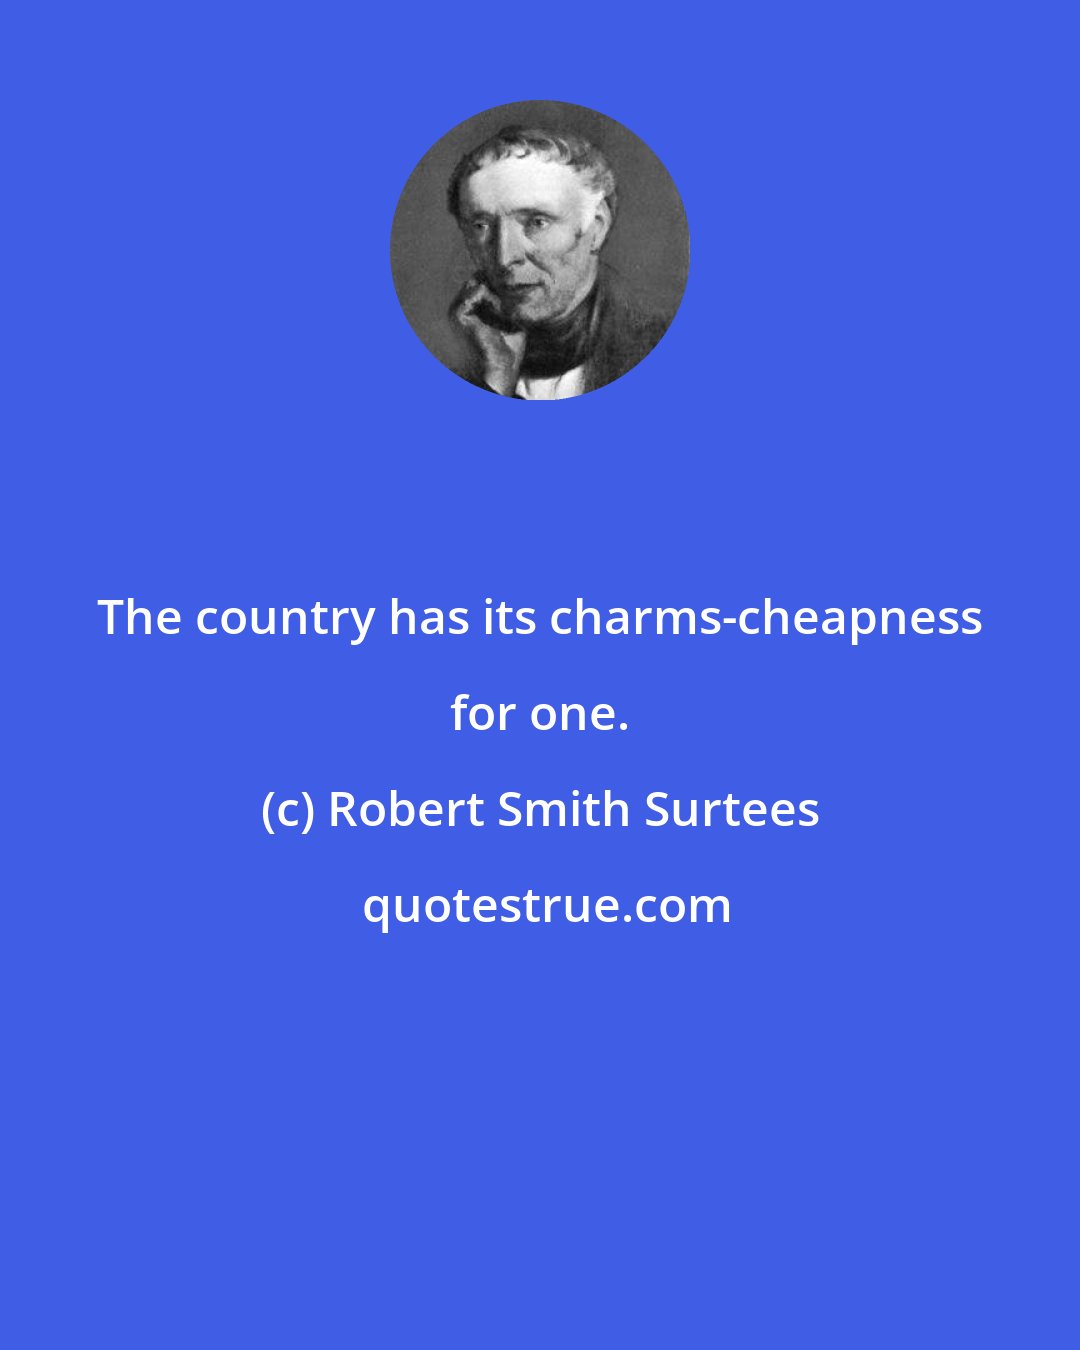 Robert Smith Surtees: The country has its charms-cheapness for one.